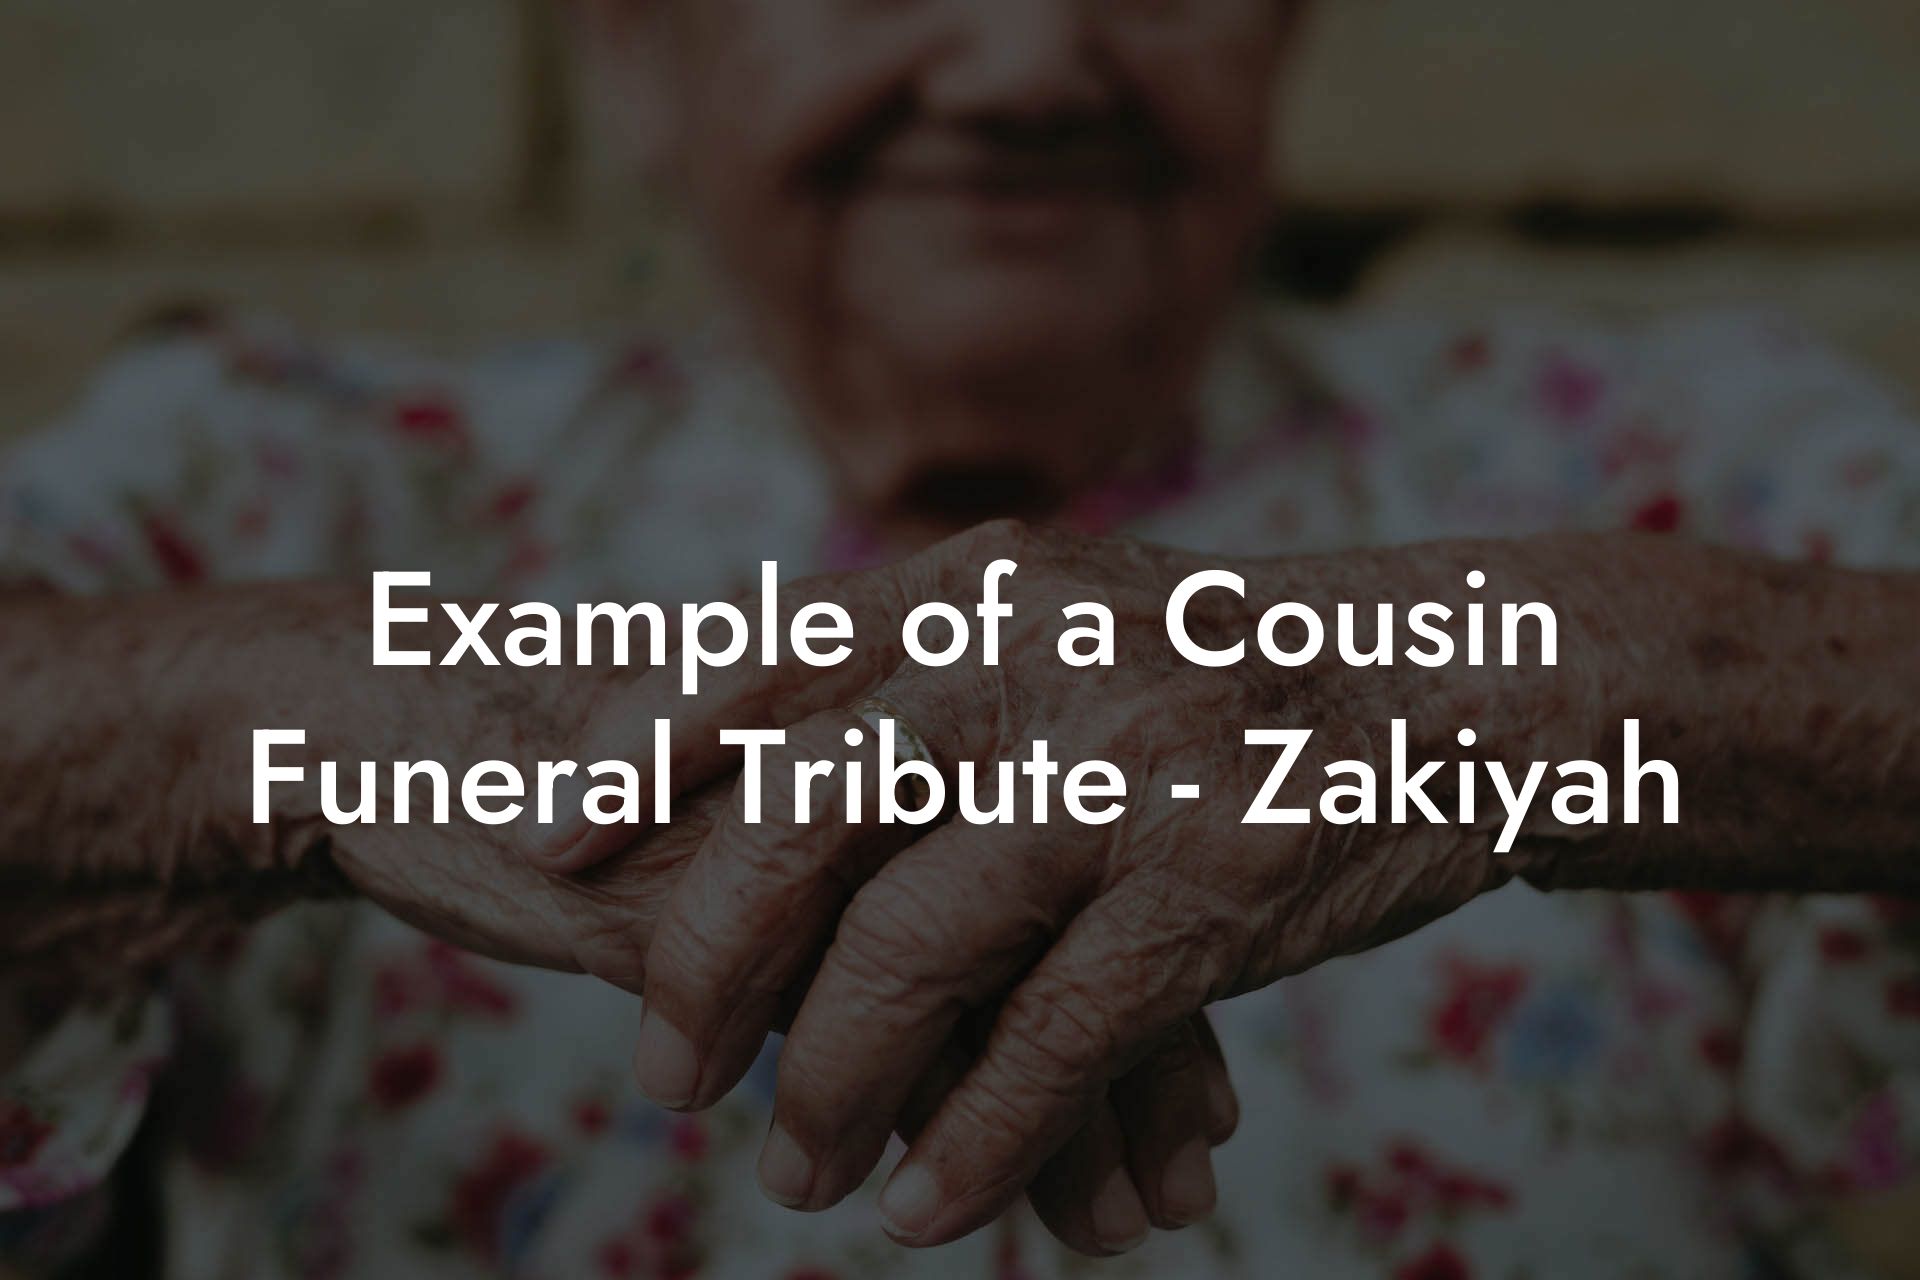 Example of a Cousin Funeral Tribute - Zakiyah